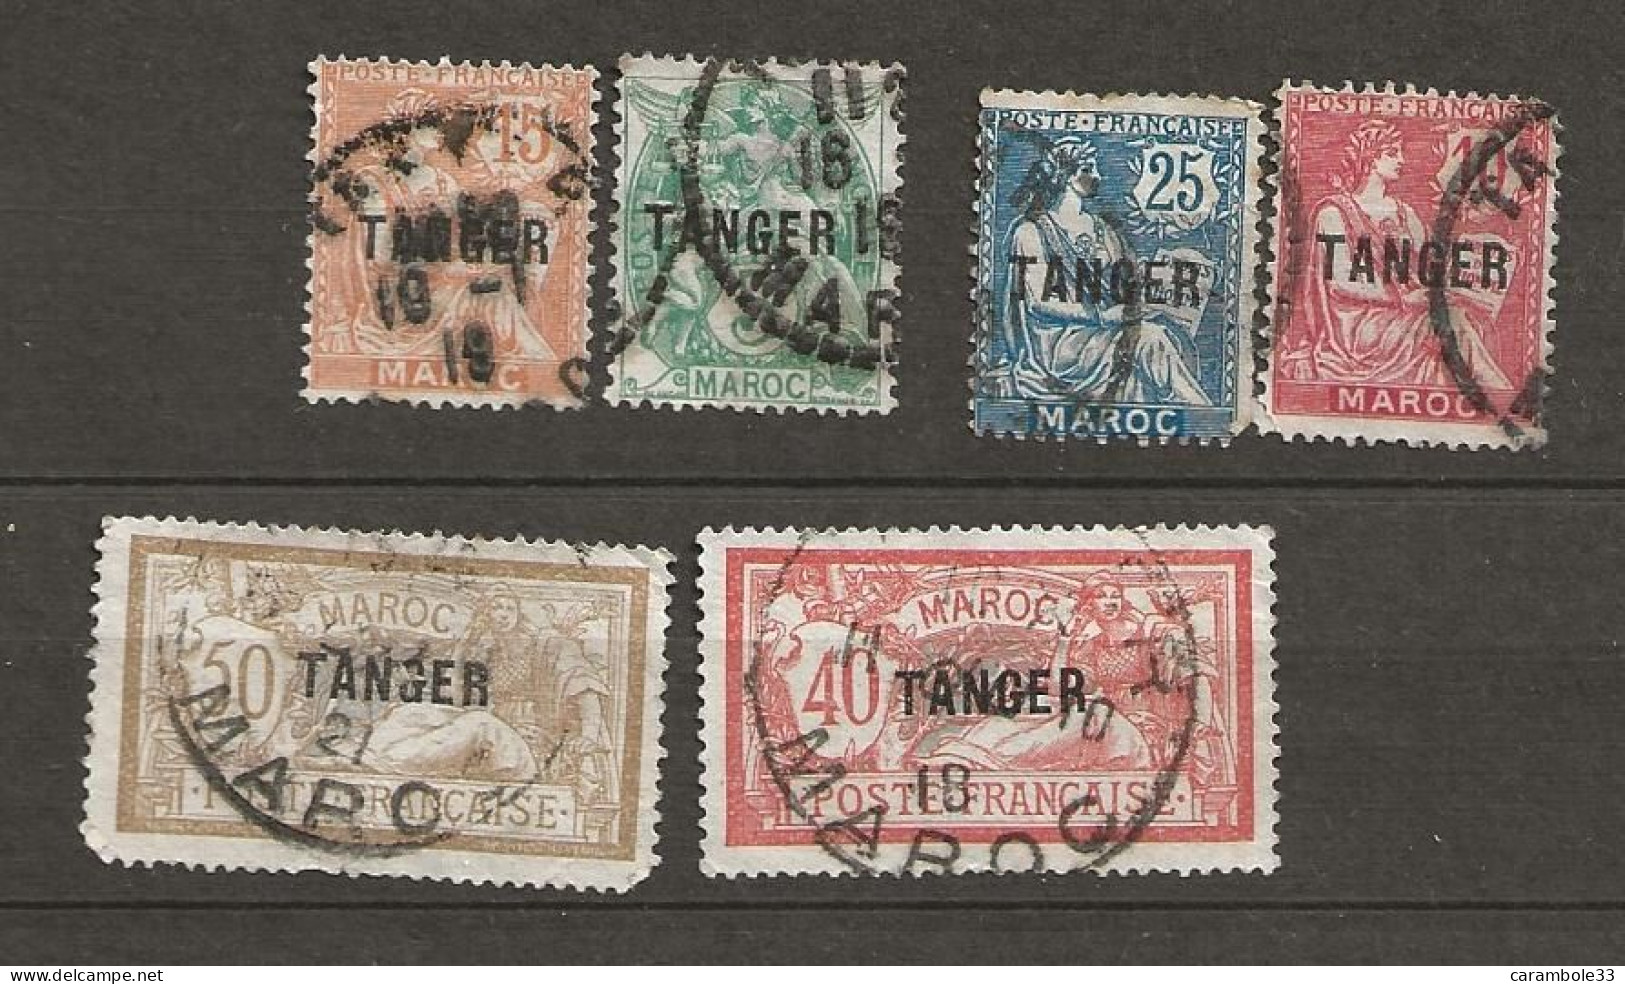 TIMBRE  MAROC  Surcharge TANGER  (1507) - Gebraucht